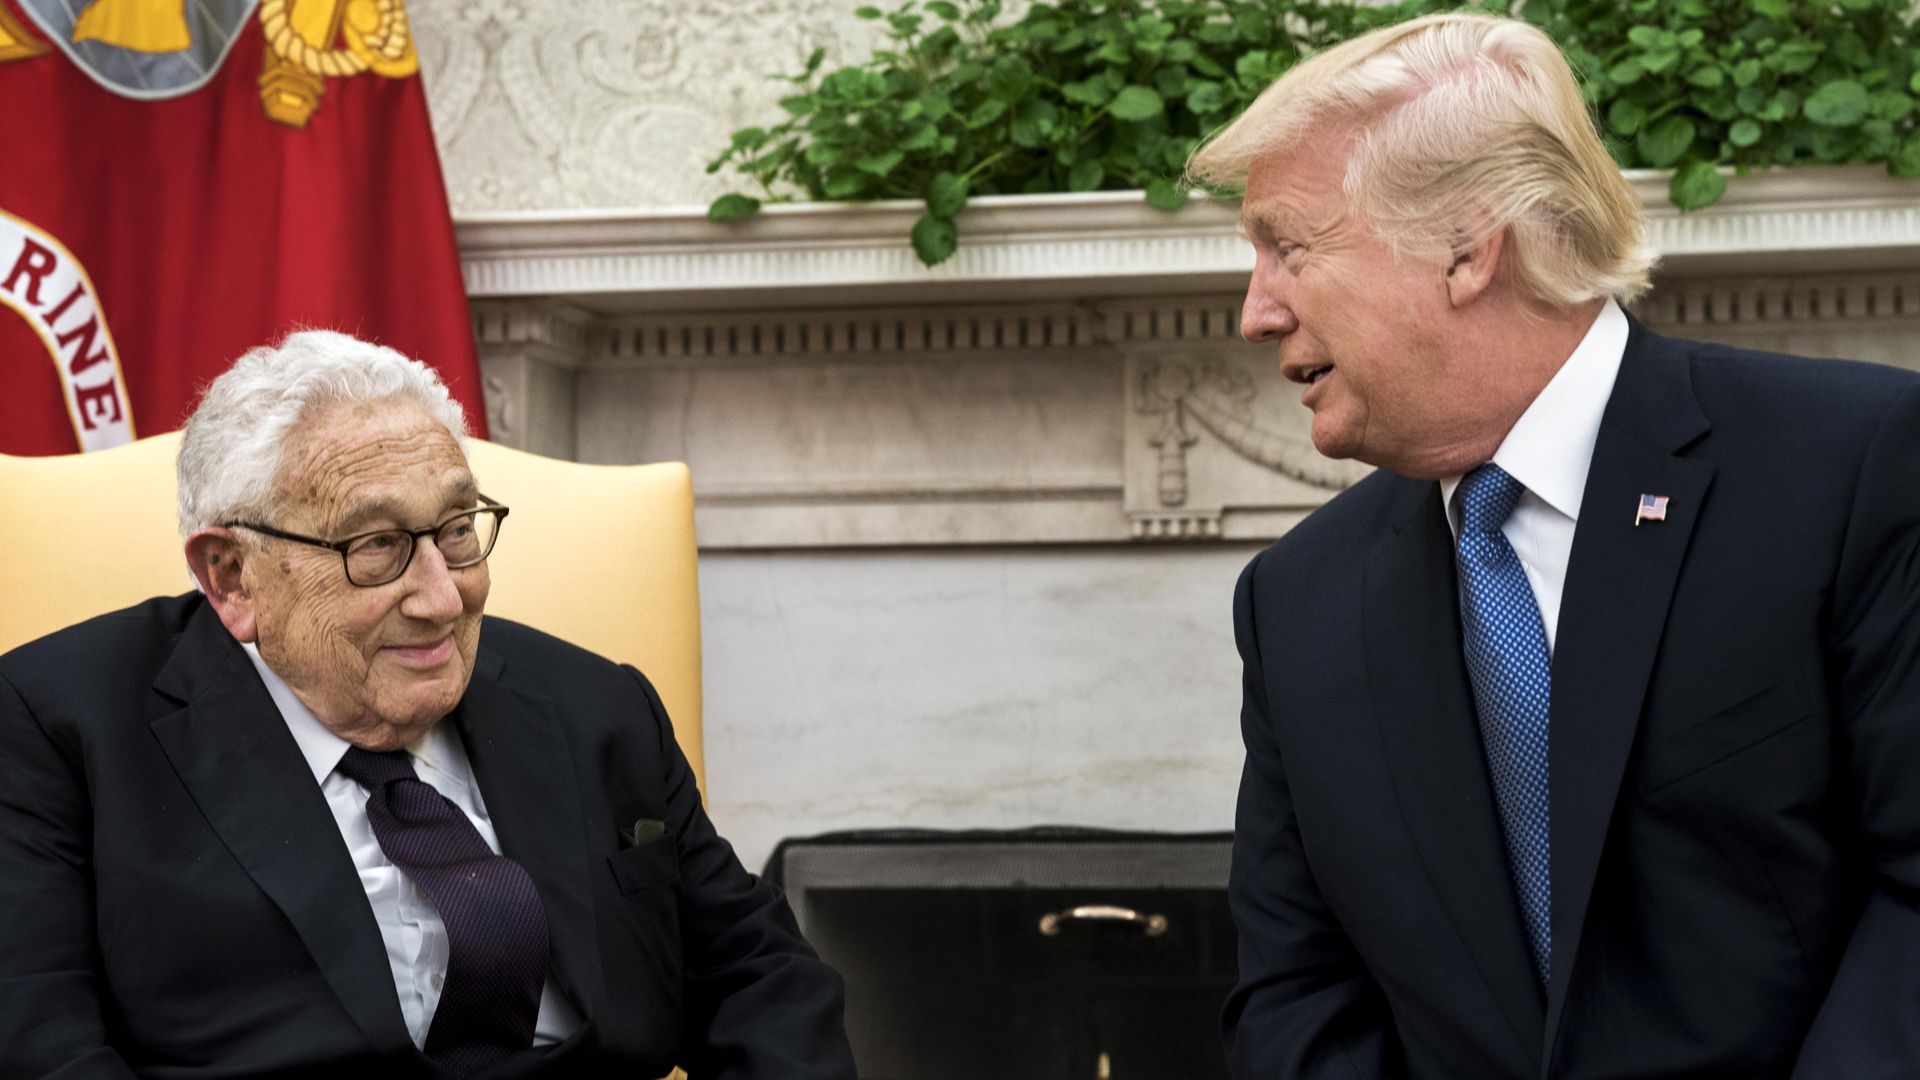 Trump meets with Kissinger for the third time - Axios